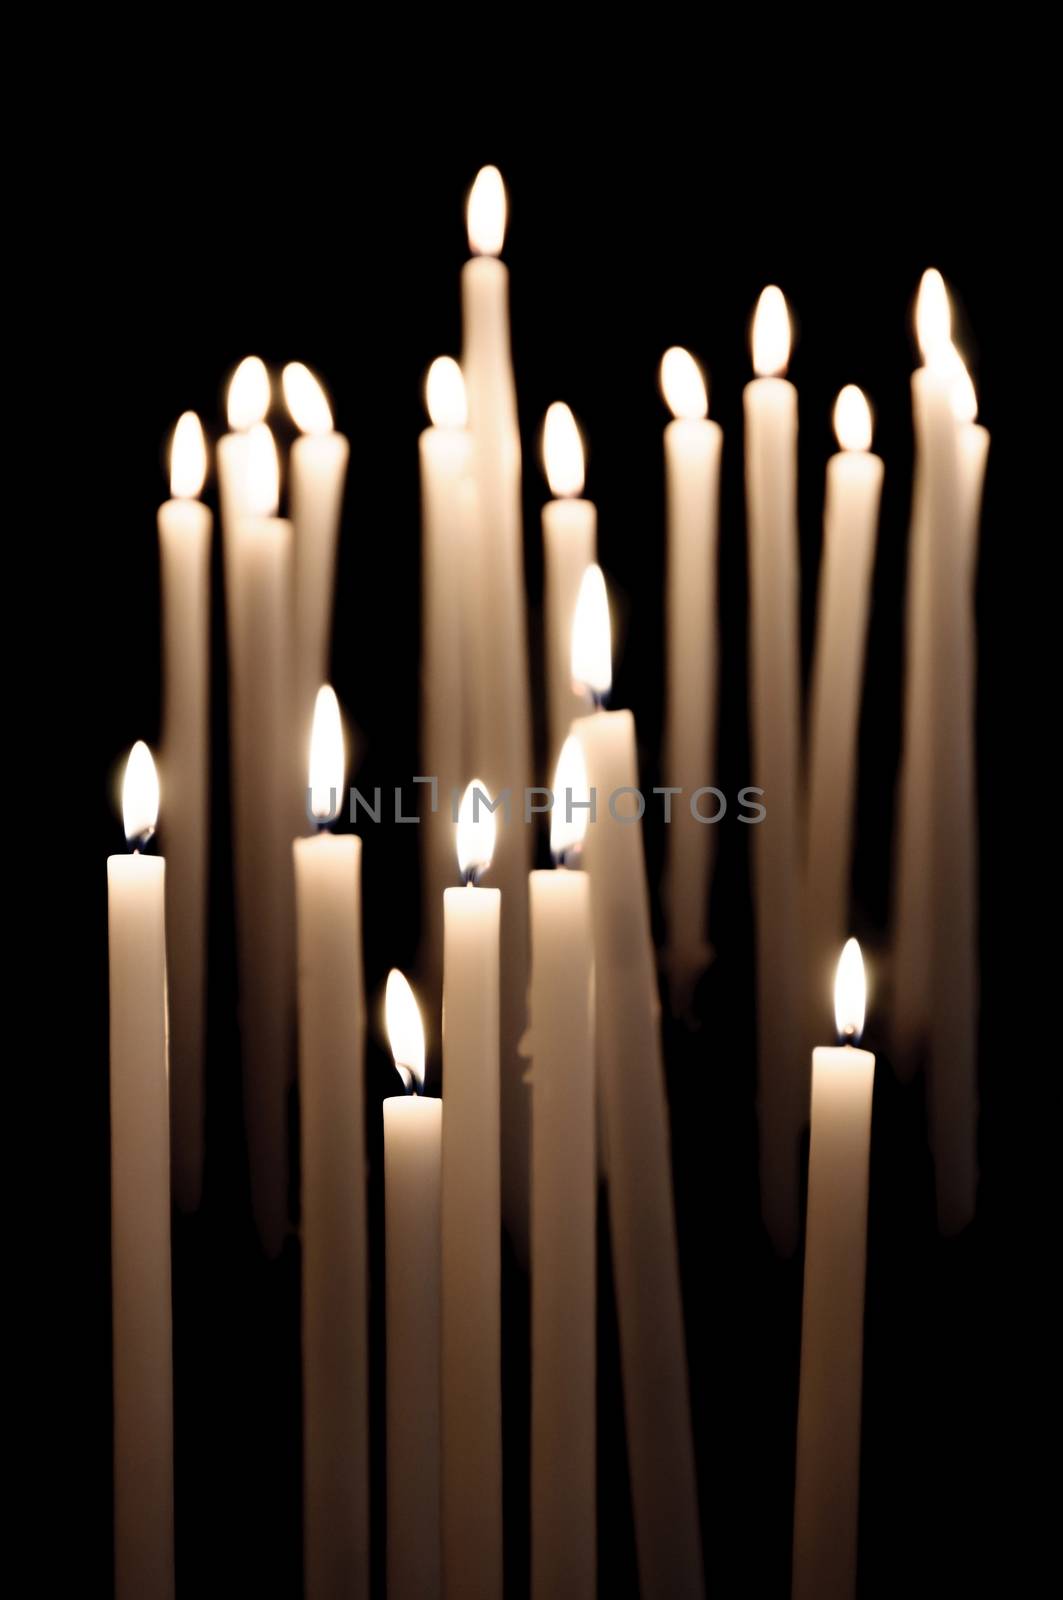 Candles burning in a church